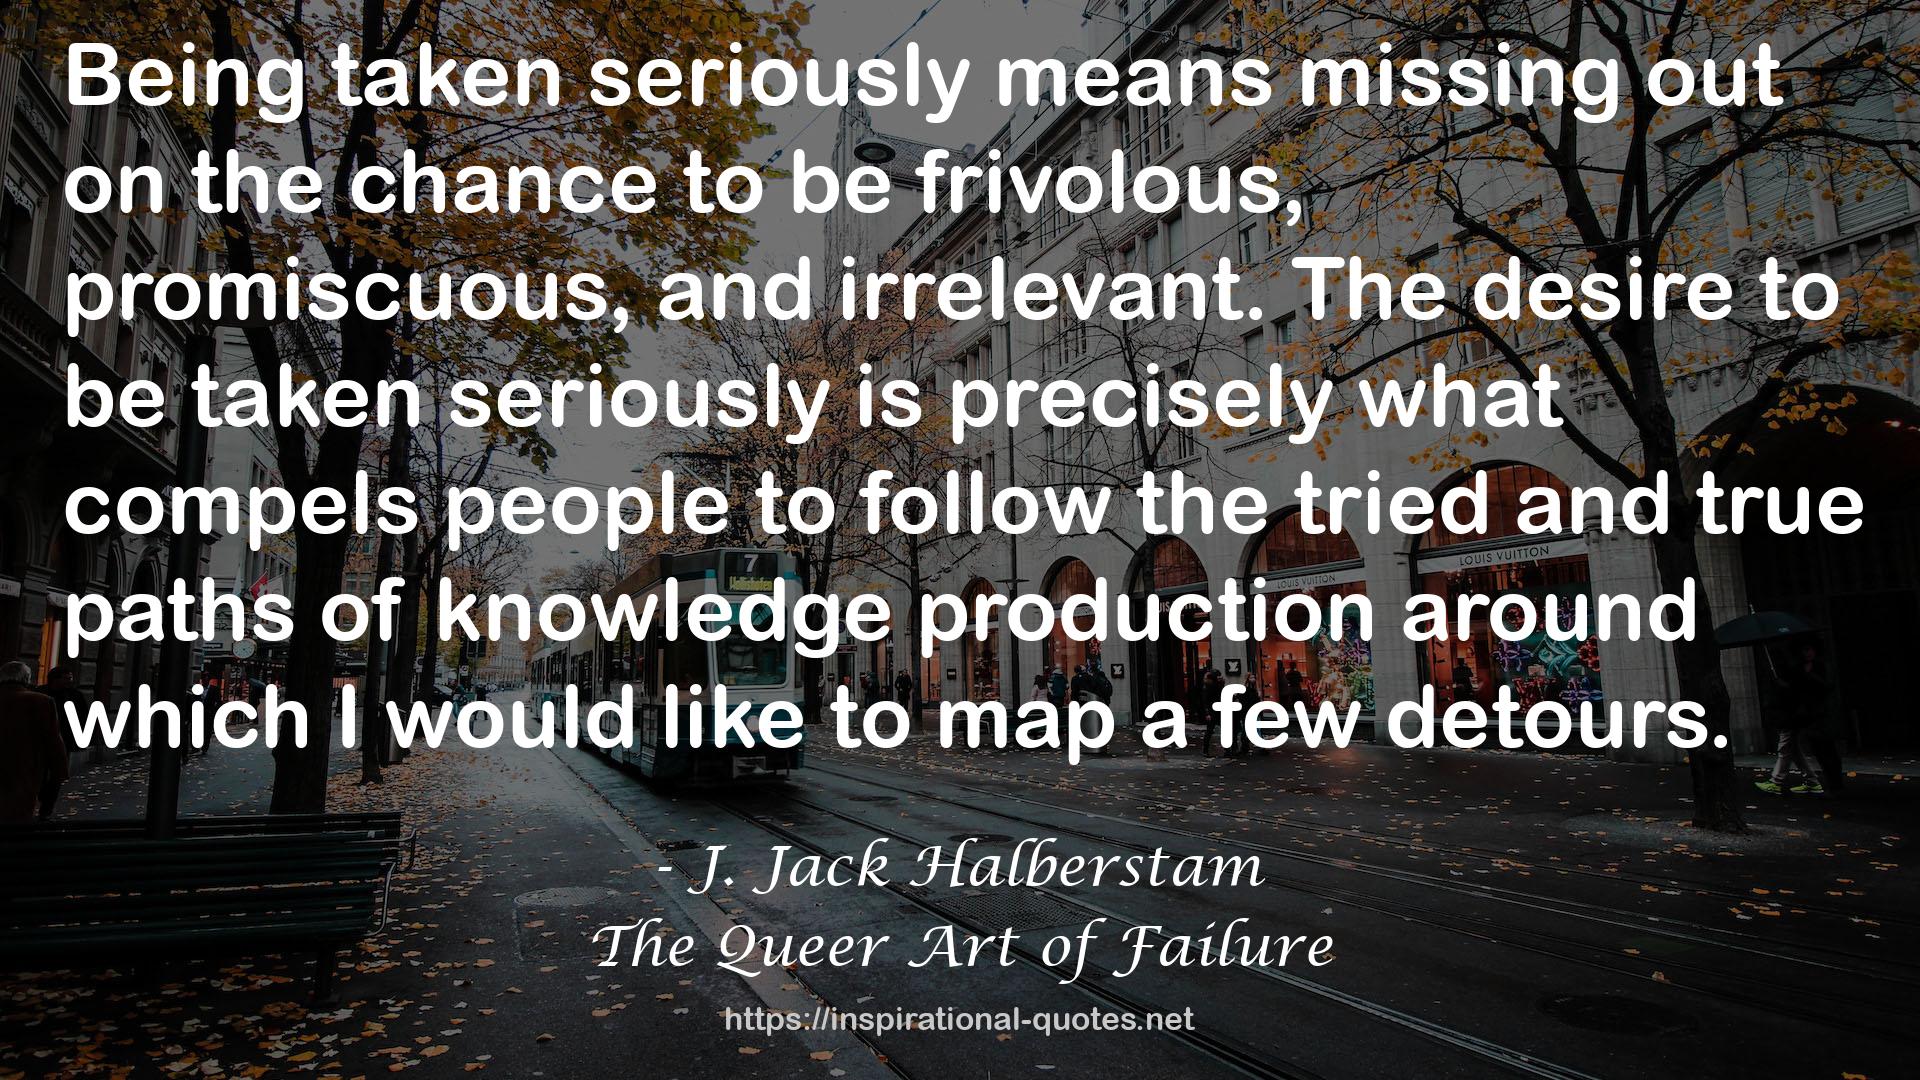 The Queer Art of Failure QUOTES